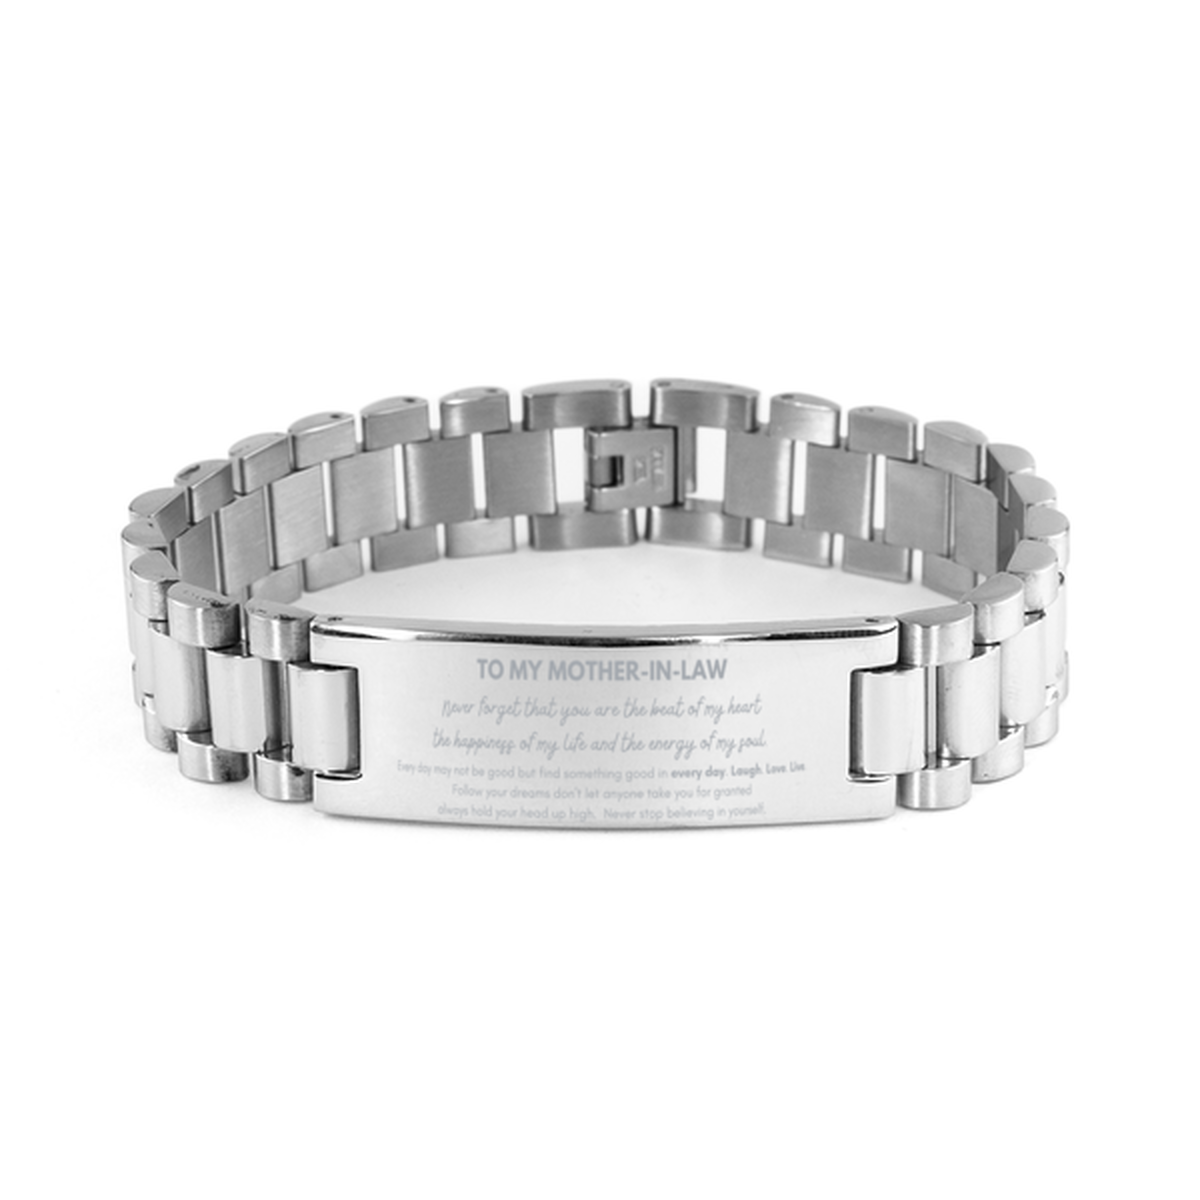 To My Mother-In-Law Bracelet Gifts, Christmas Mother-In-Law Ladder Stainless Steel Bracelet Present, Birthday Unique Motivational For Mother-In-Law, To My Mother-In-Law Never forget that you are the beat of my heart the happiness of my life and the energy